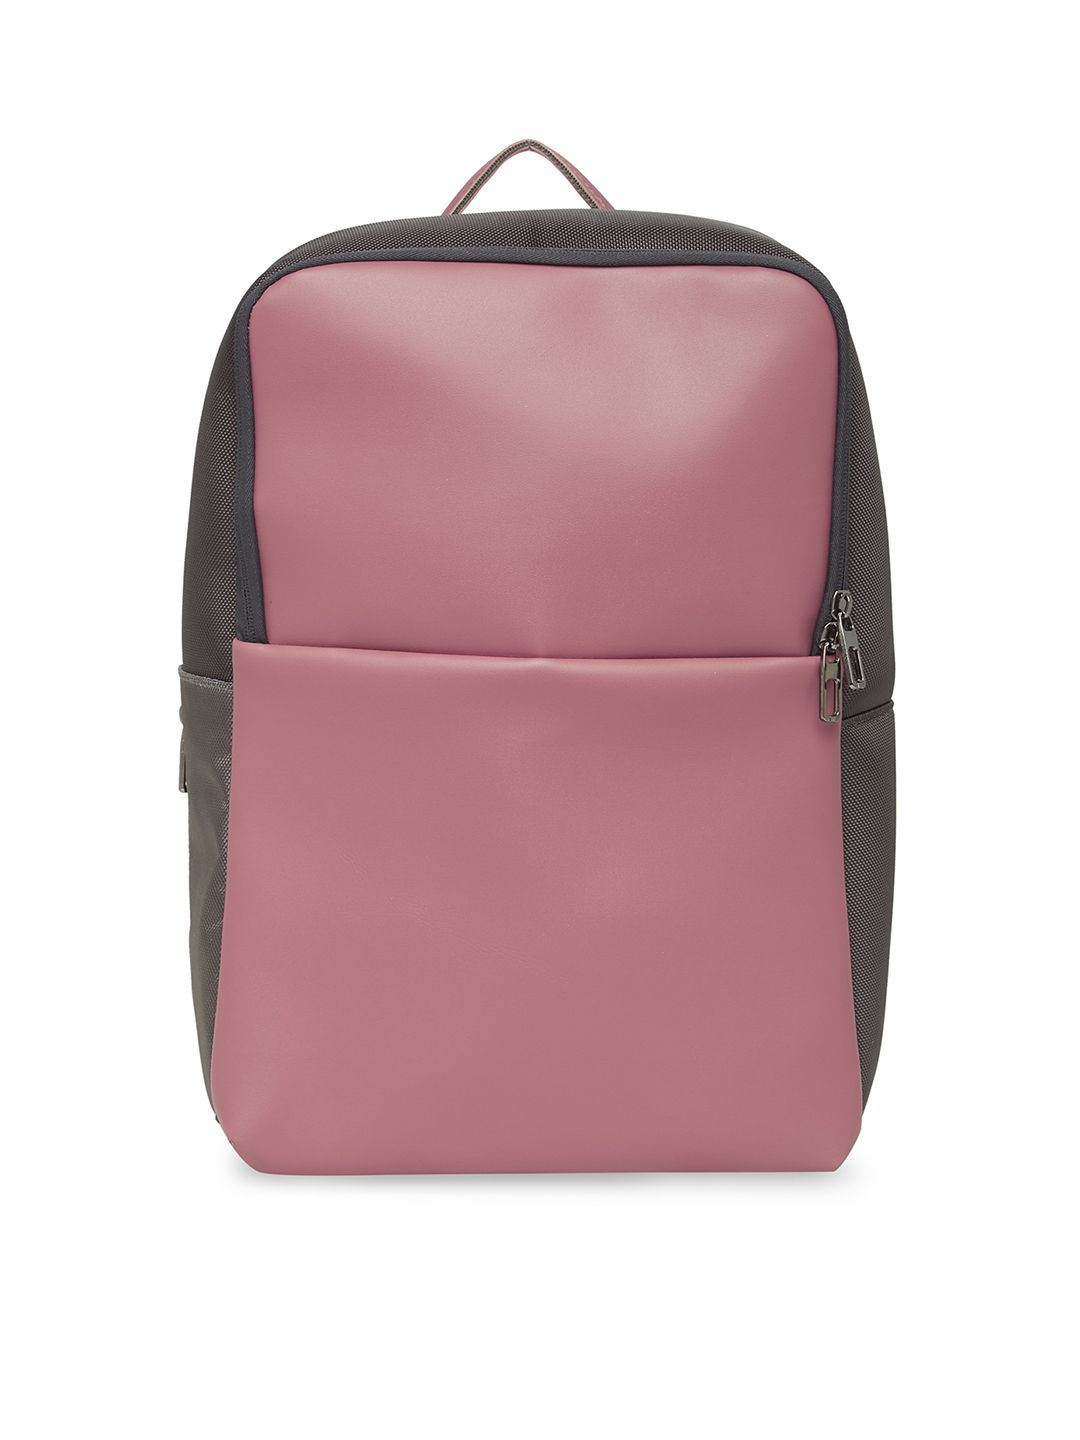 MBOSS Unisex Pink & Grey Colourblocked Backpack Price in India